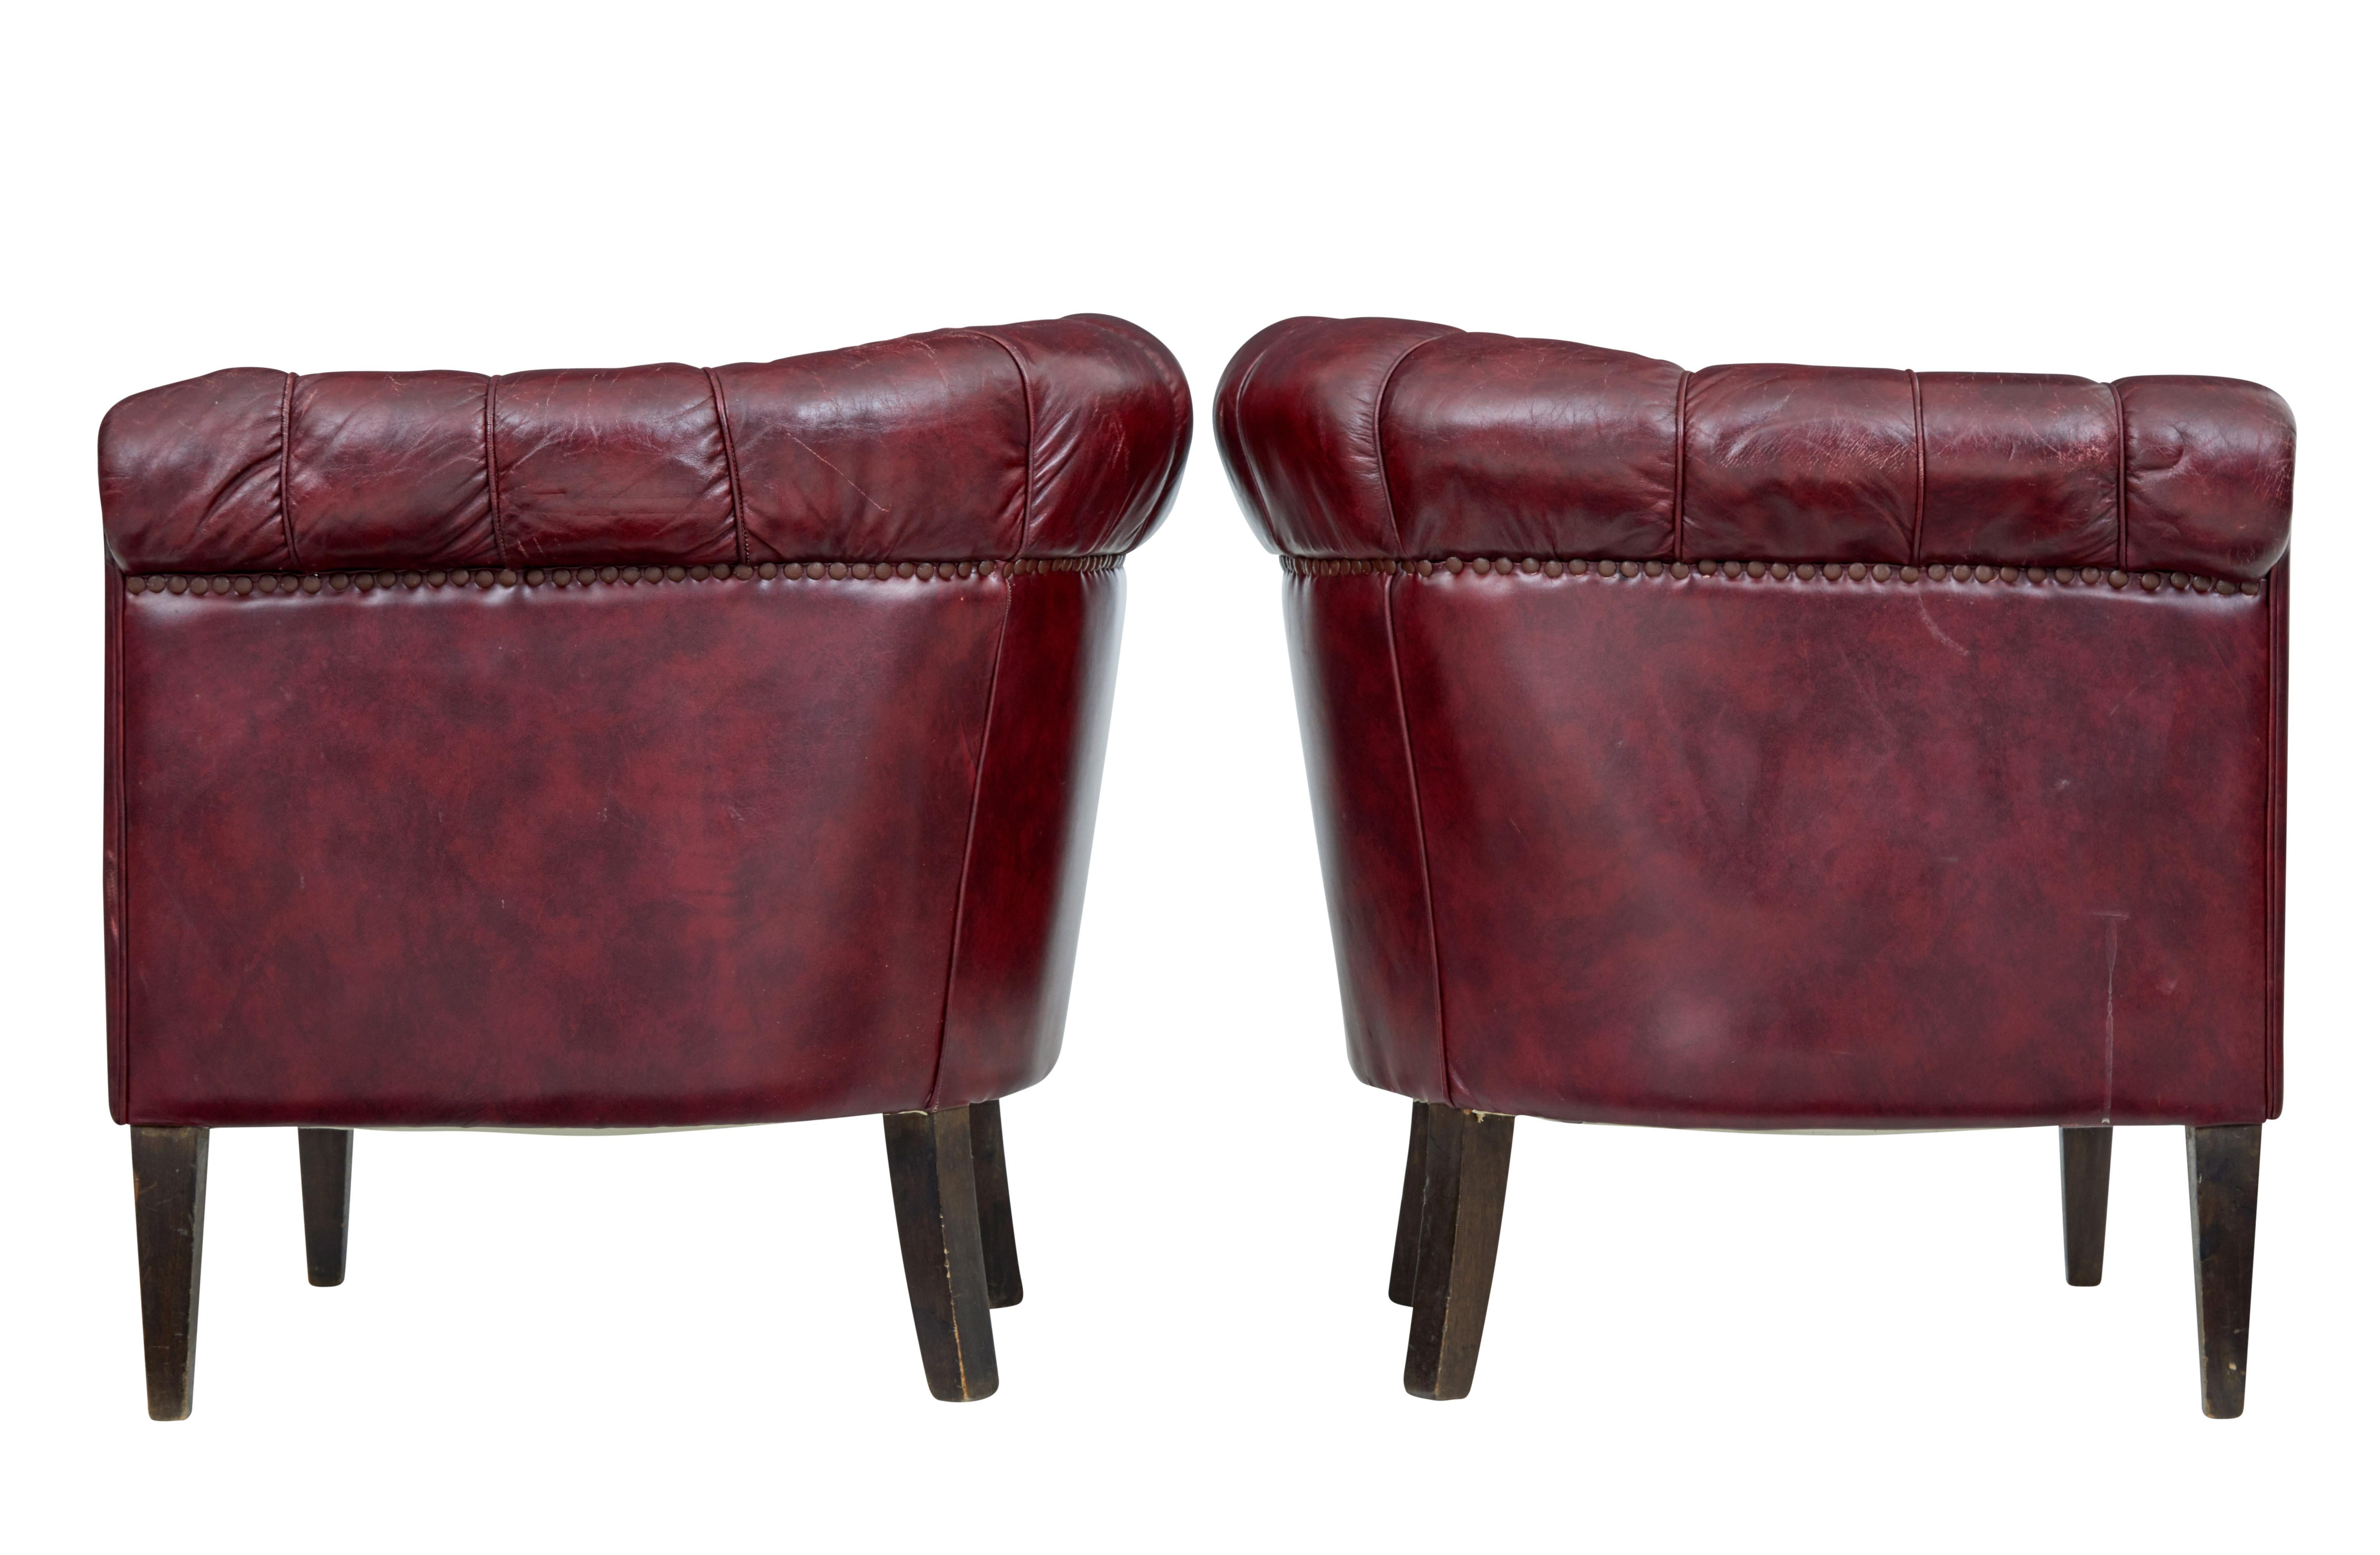 Good quality pair of leather armchairs, circa 1950.

Over stuffed arms and button back design make these a very comfortable pair of chairs. Deep red leather arranged with piping and studwork.

Leather in very good condition for age with very